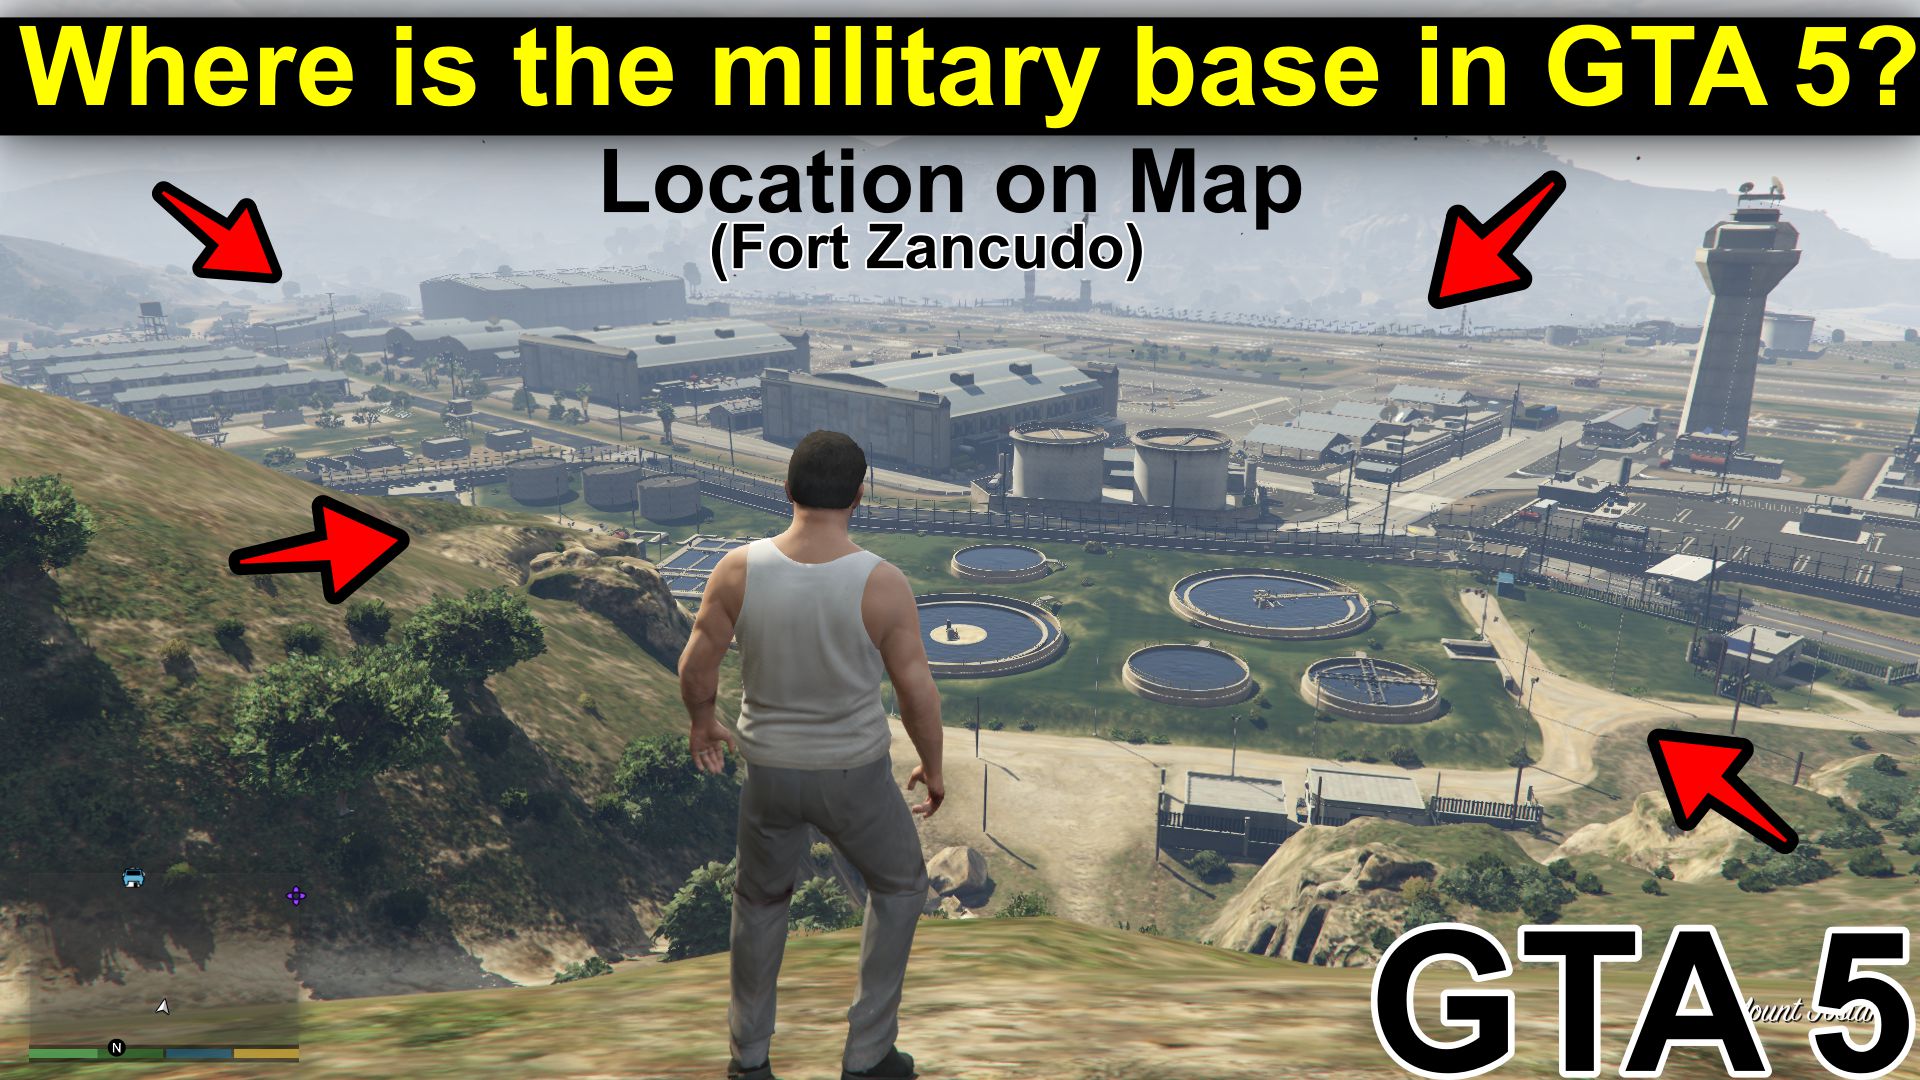 In GTA 5 where is the military base